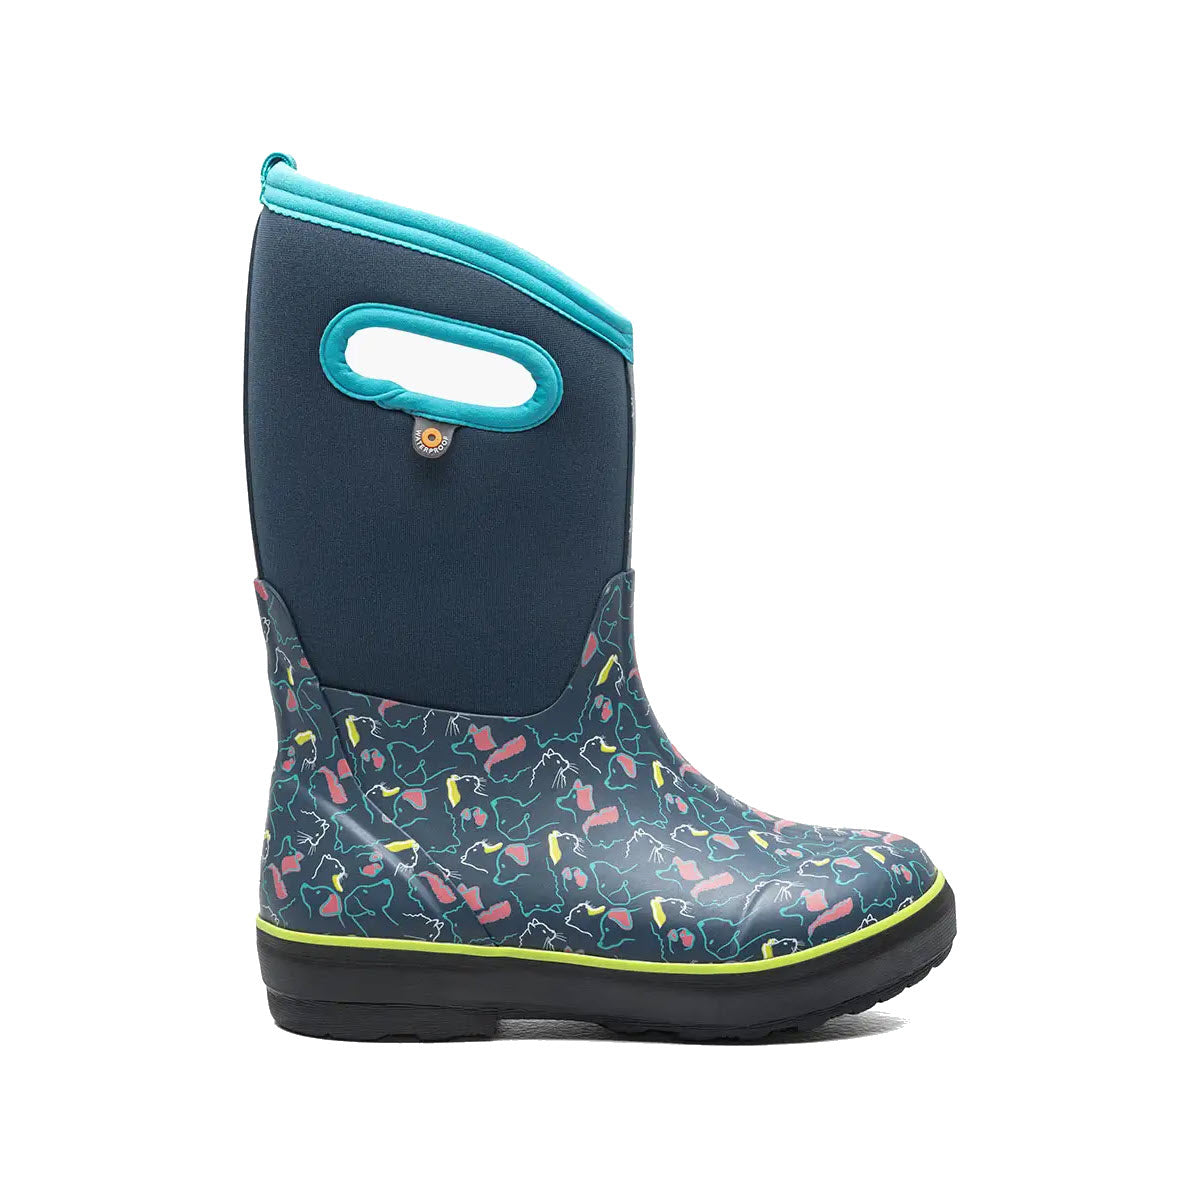 A Bogs Classic II Pets in Ink Blue Multi - Kids with a navy upper decorated with colorful bird patterns, featuring a turquoise handle and neon yellow trim, and equipped with subzero Neo-Tech waterproof insulation, isolated on a white background.